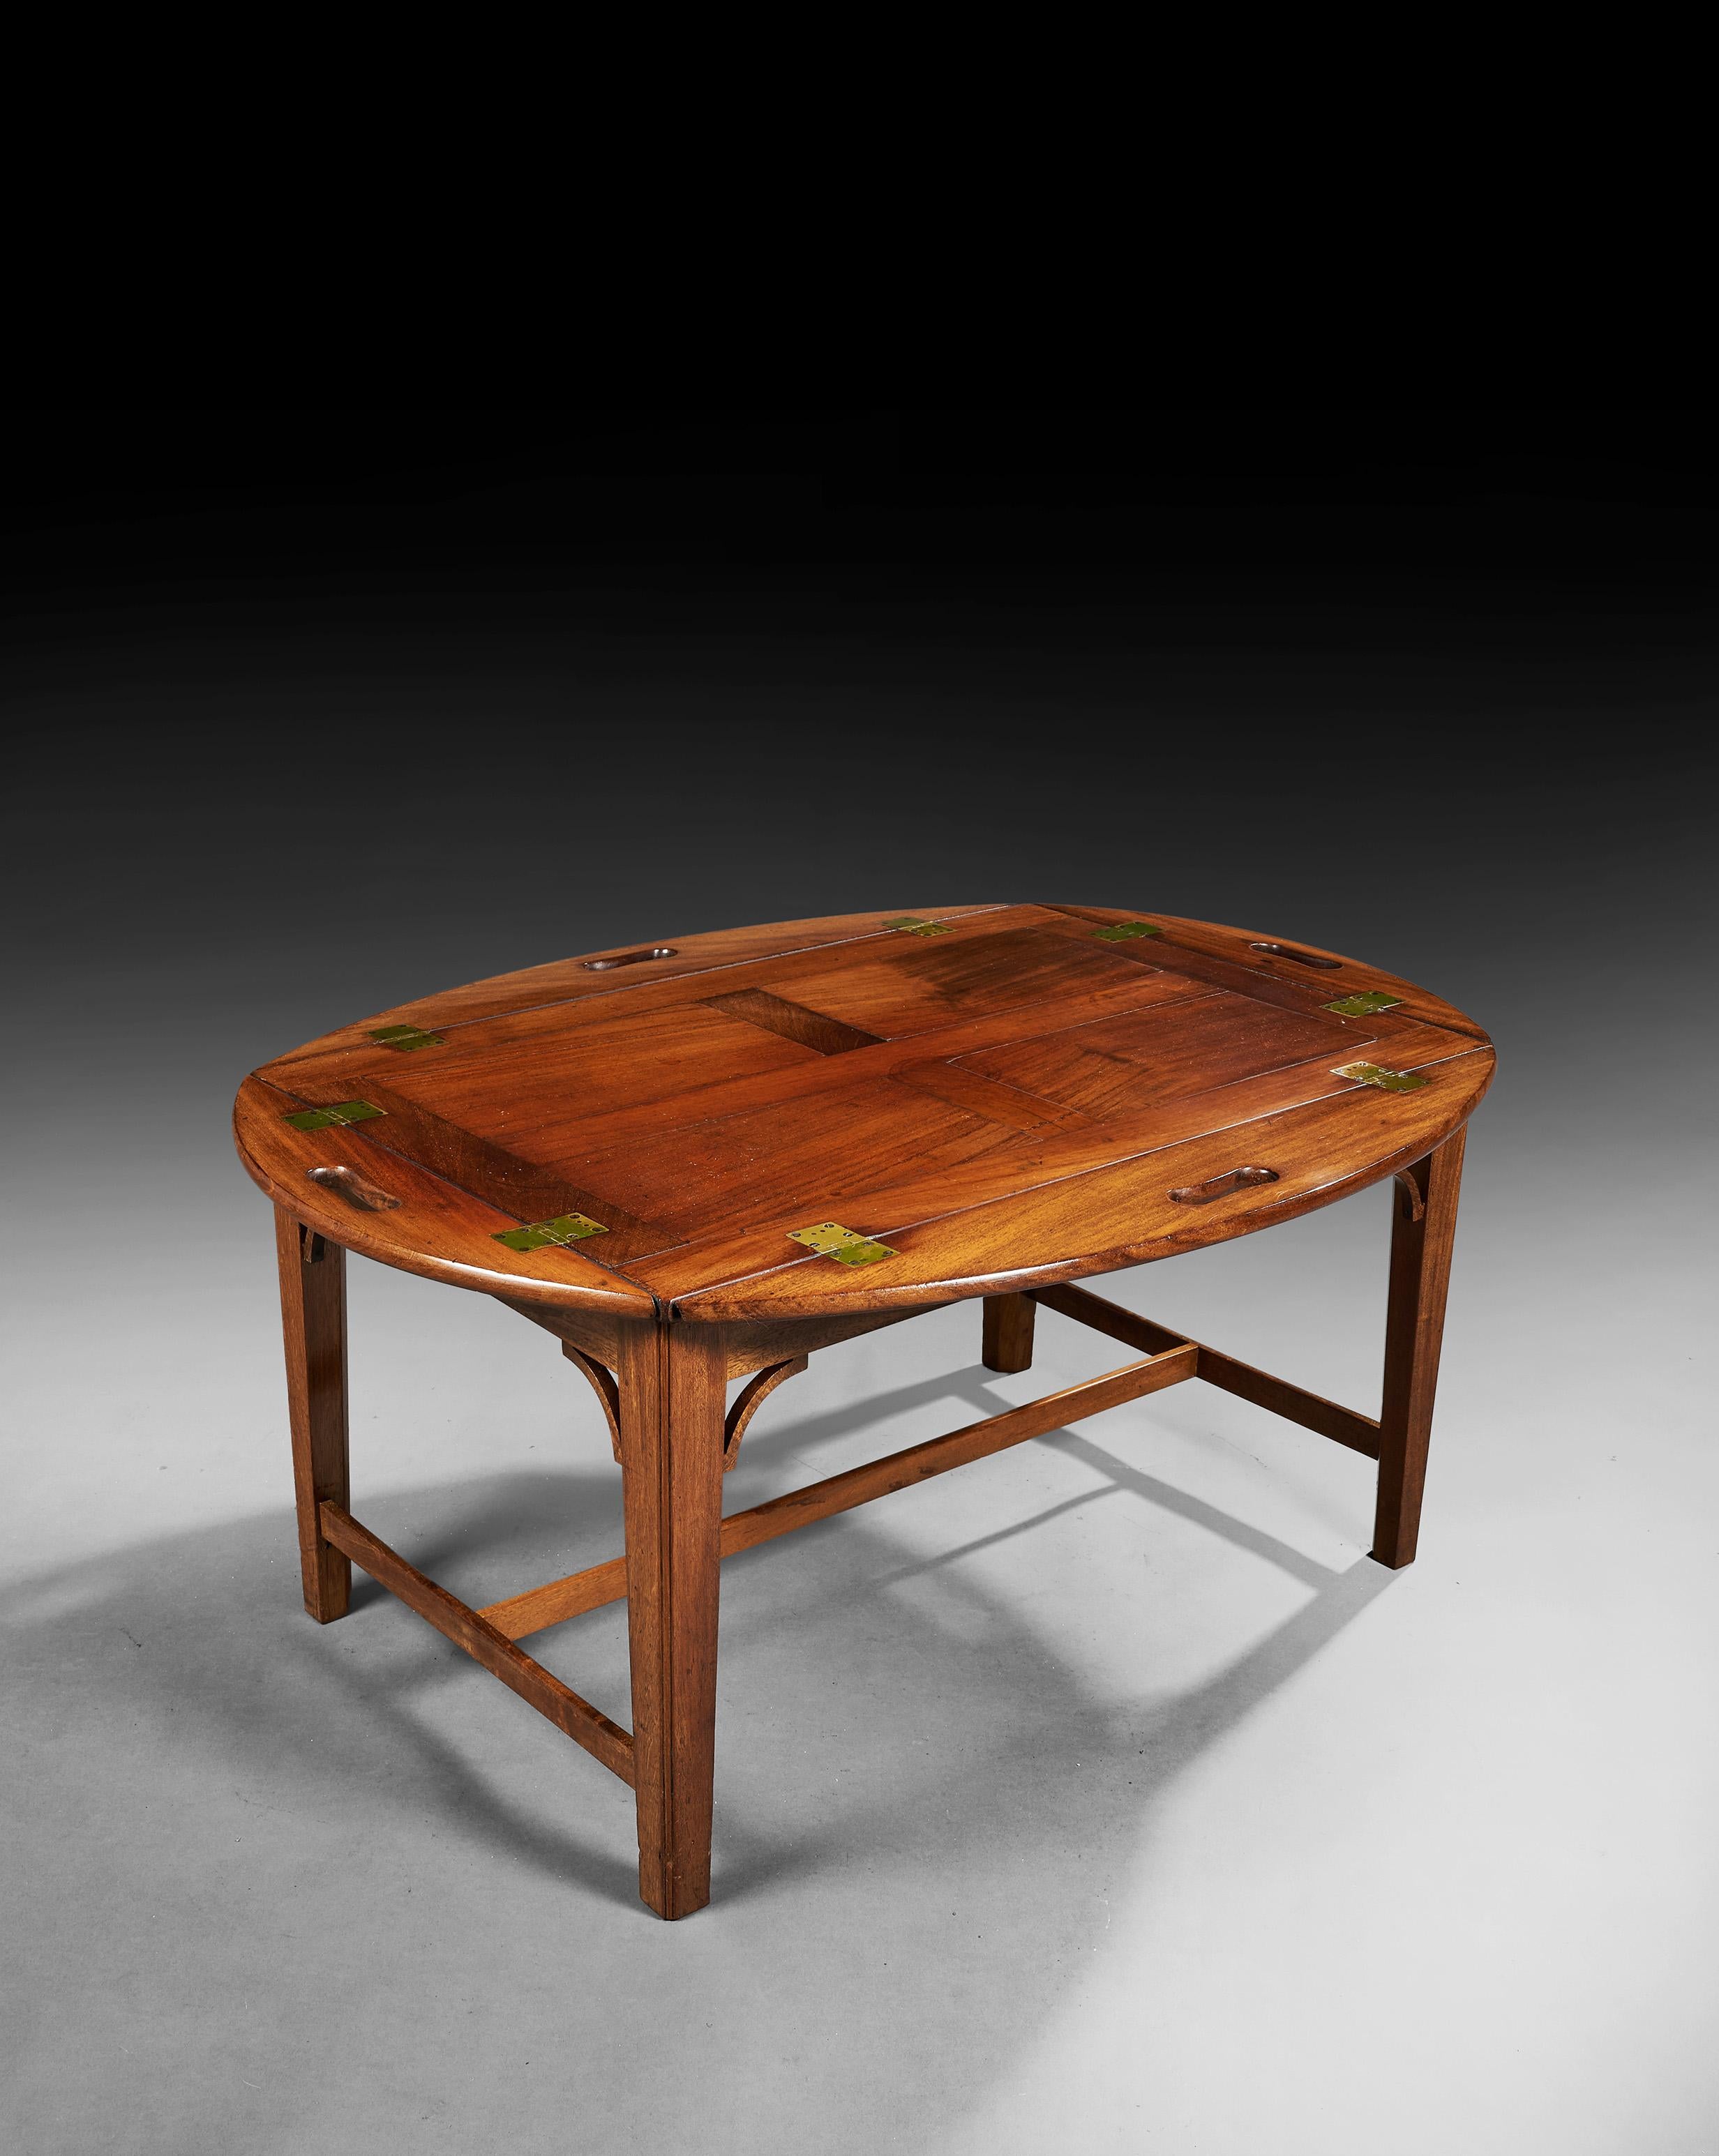 A fine Regency Period Hinged Butlers tray on later stand, ideal as a coffee table.

Regency circa 1810 - Stand circa 1920.

The oval shaped mahogany tray top, of panelled construction and outstanding natural color and original patina, having